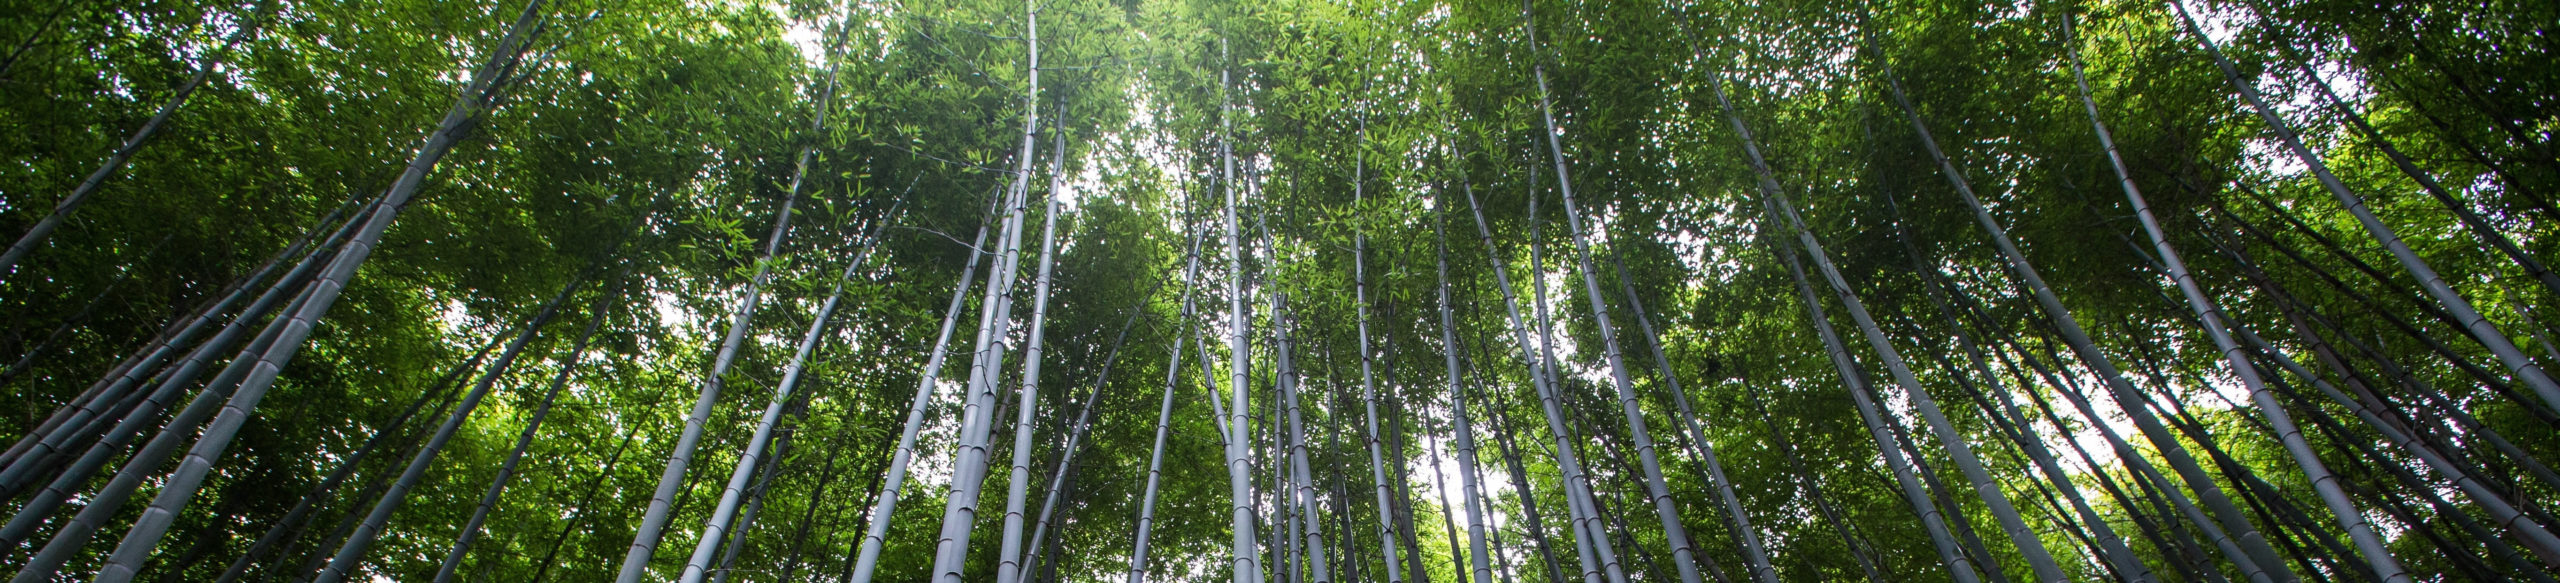 Photo: Bamboo Plants from below